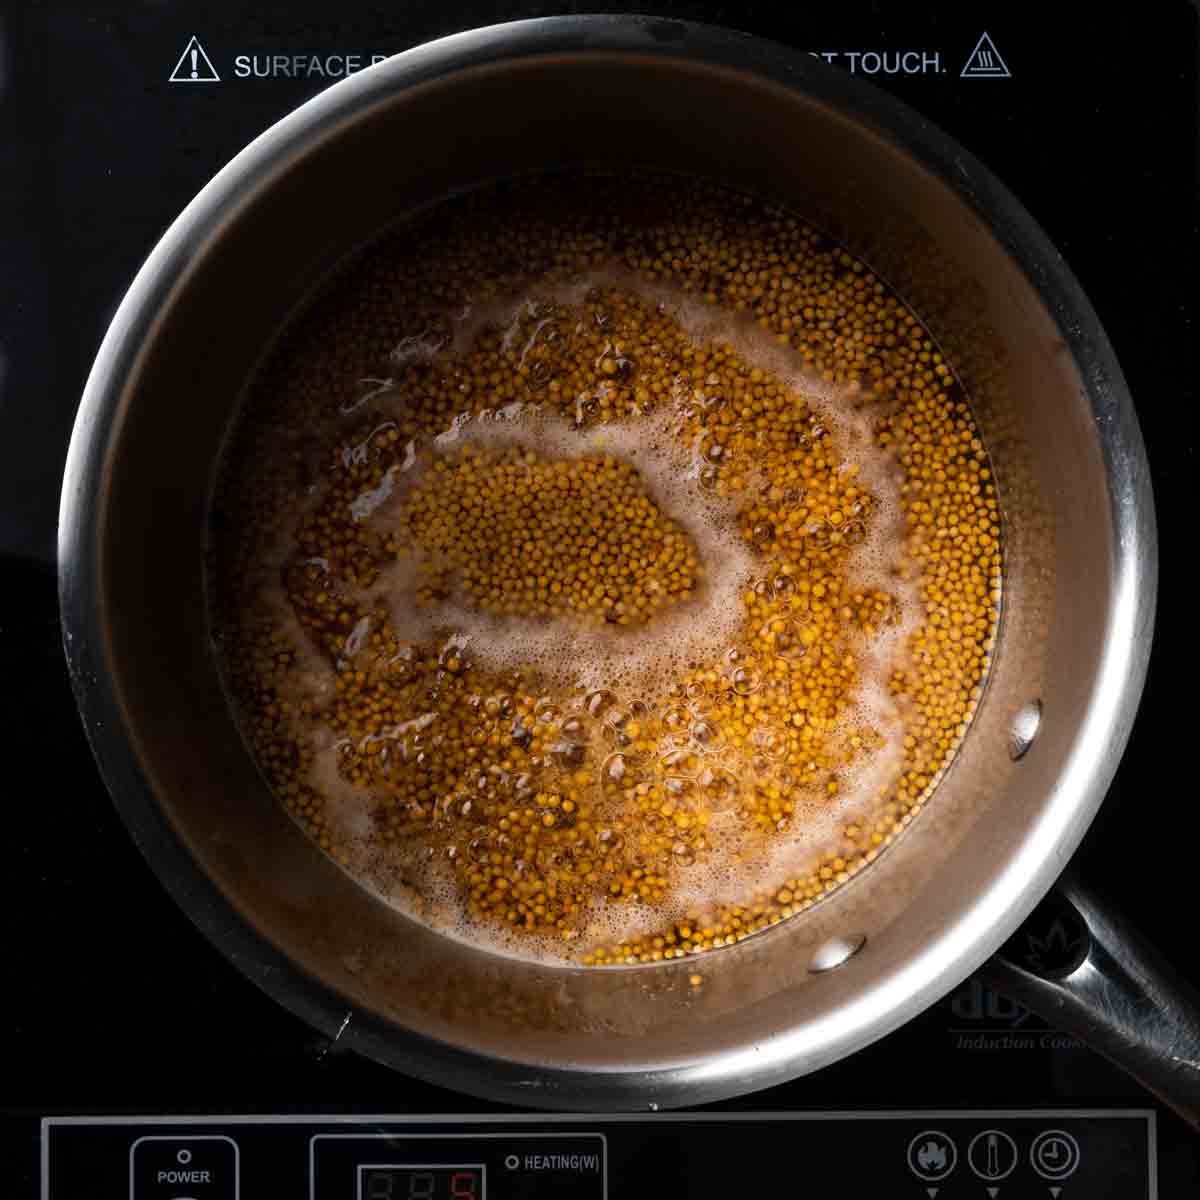 Yellow mustard seeds, vinegar and water simmering in a small pot